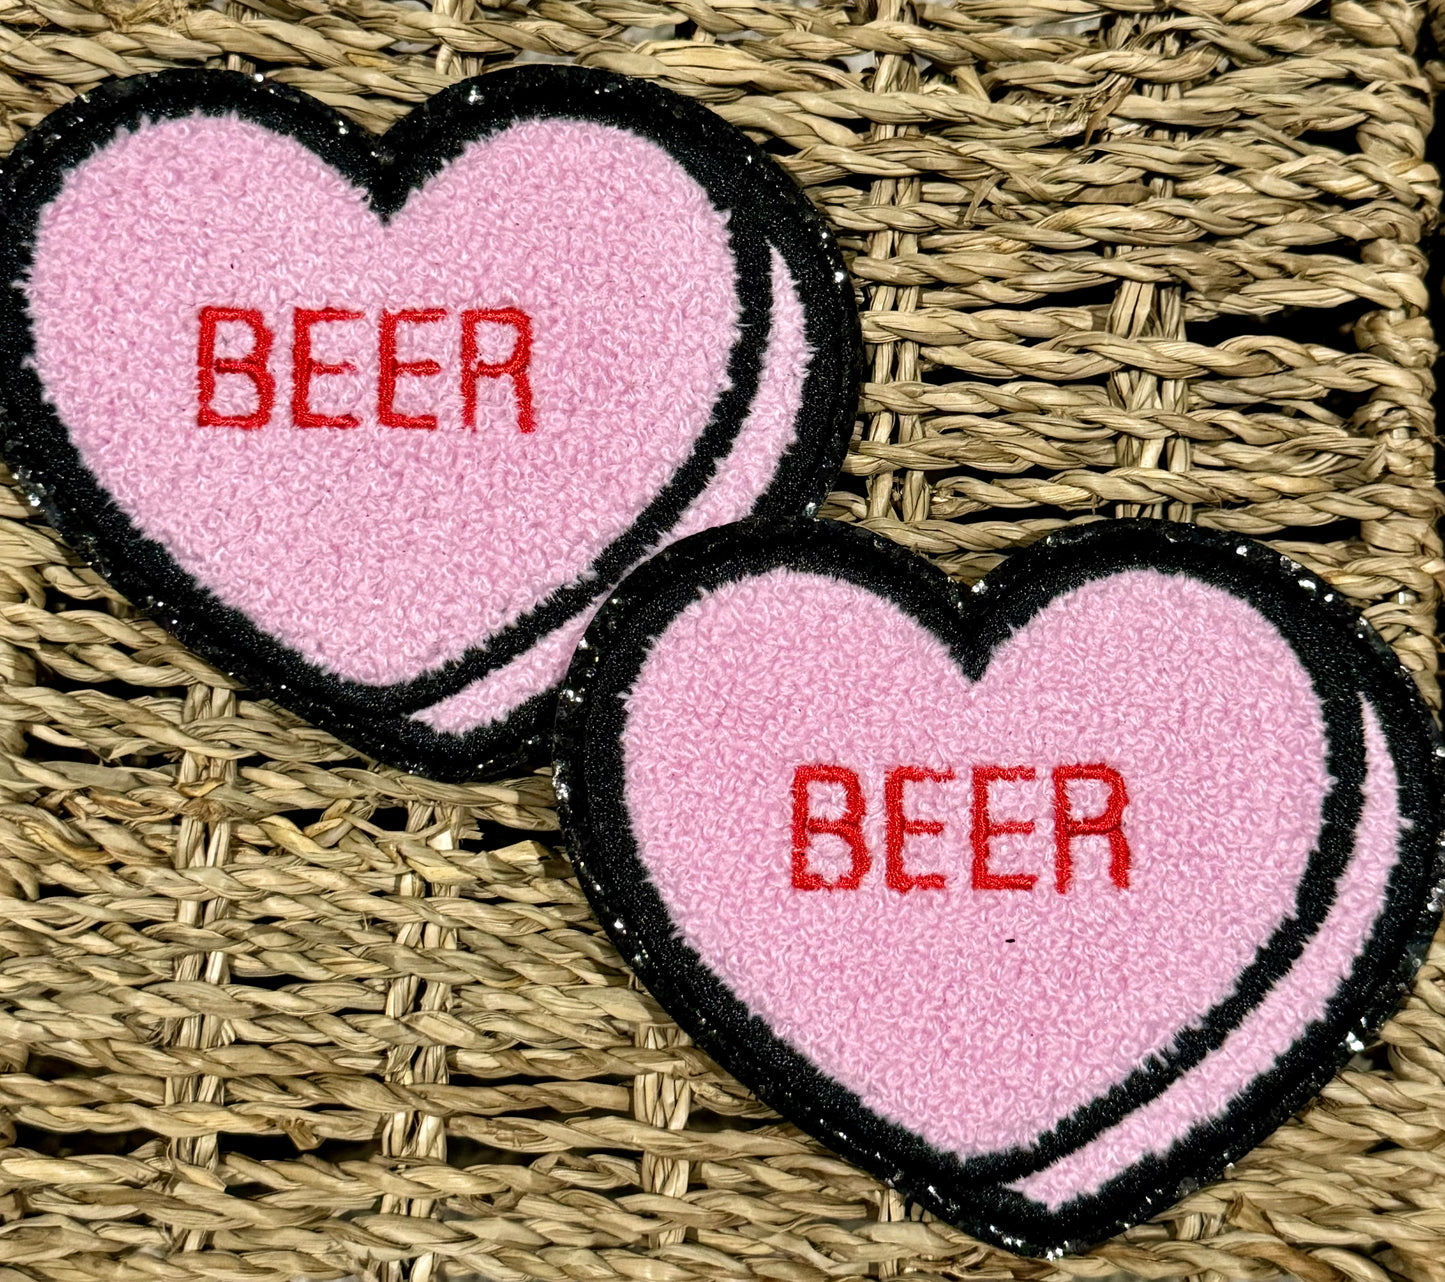 Conversation Candy Hearts Patches